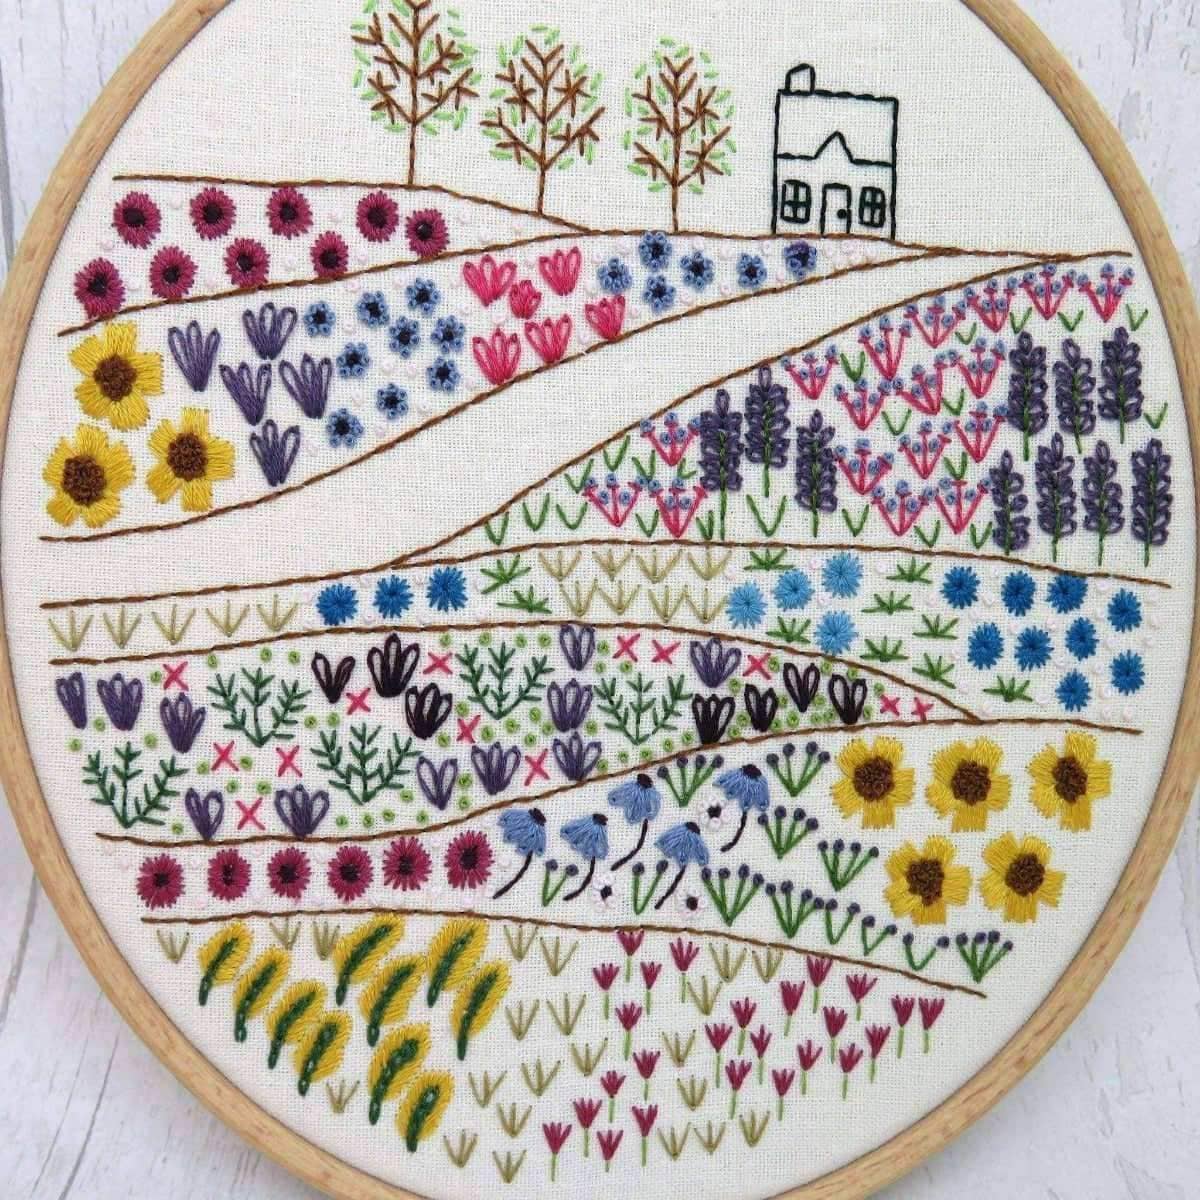 Flower Meadow Cottage Hand Embroidery Pattern , PDF Download , StitchDoodles , embroidery hoop kit, embroidery kits for adults, embroidery kits for beginners, flower embroidery, hand embroidery, modern embroidery kits, PDF pattern, unique embroidery kits, wildlife embroidery , StitchDoodles , shop.stitchdoodles.com